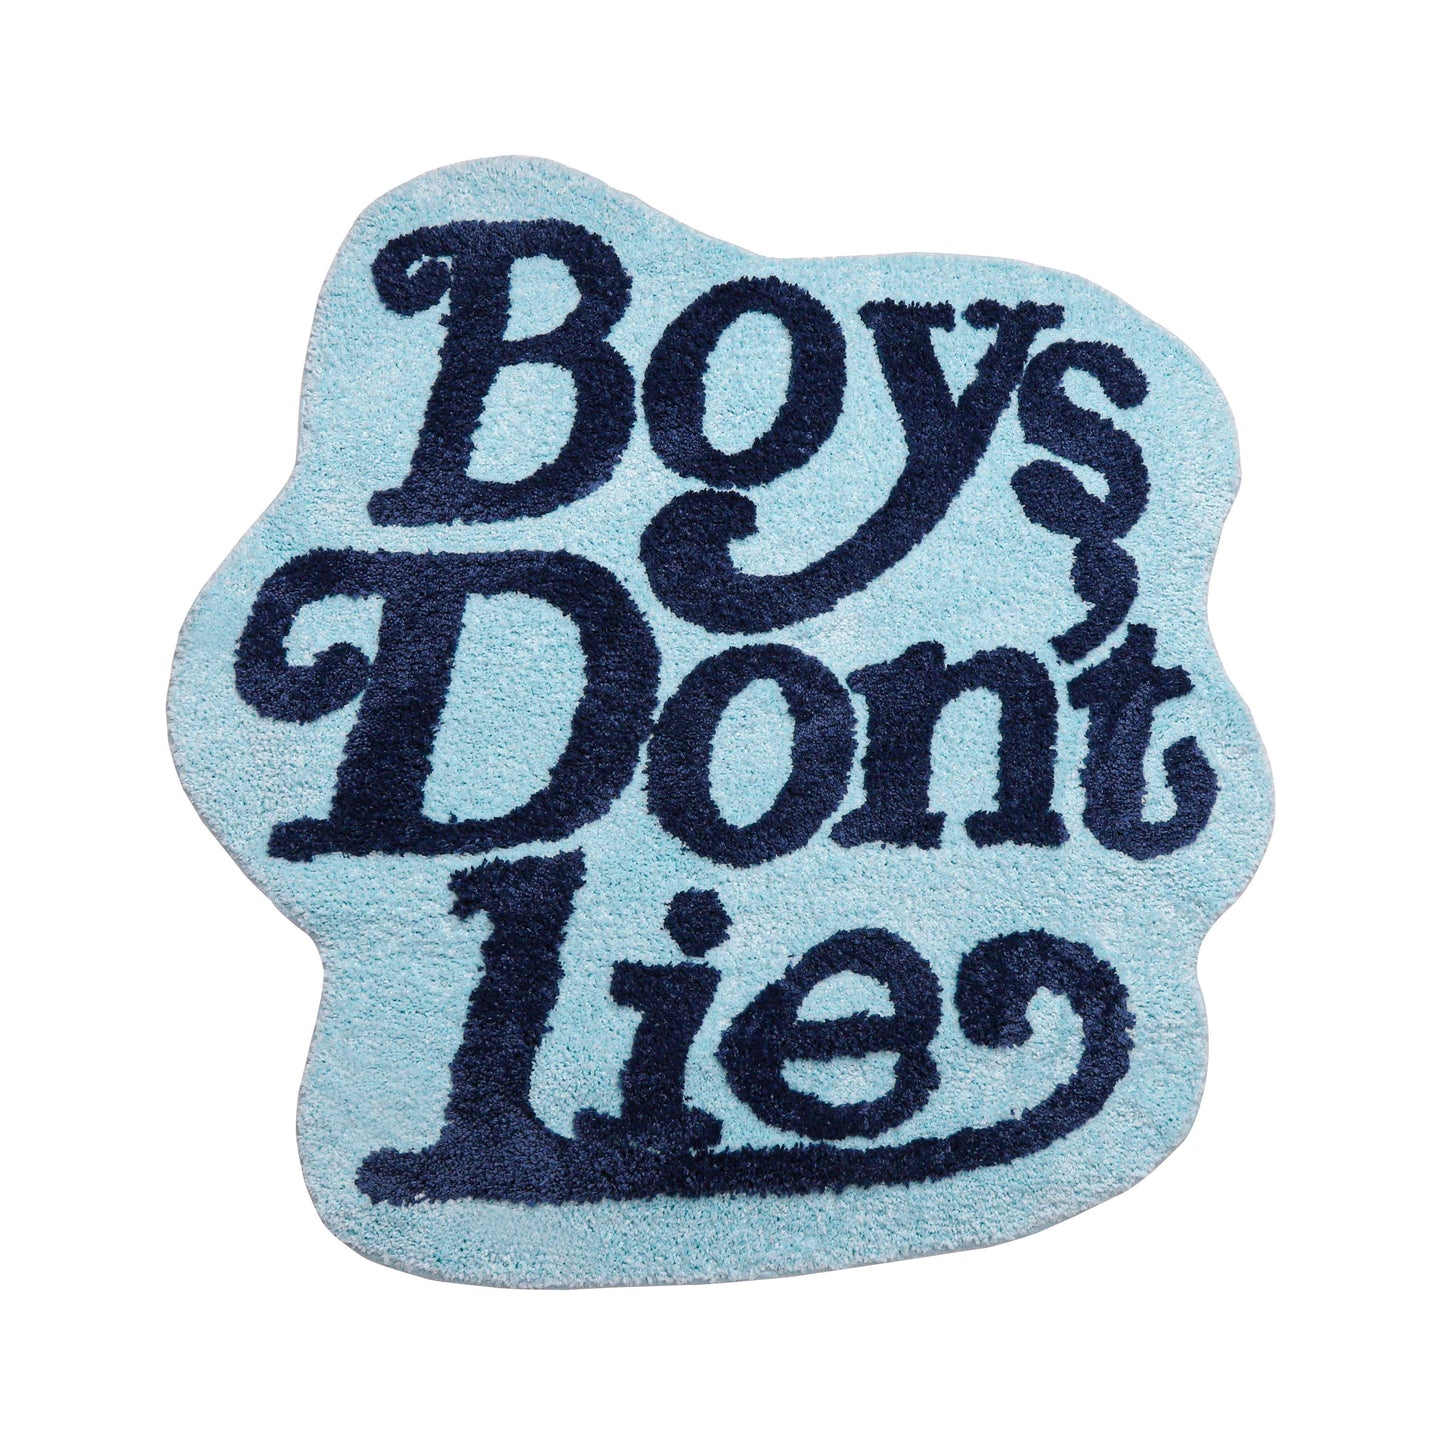 CORX Designs - Irregular Girls Don't Cry and Boys Don't Lie Rug - Review